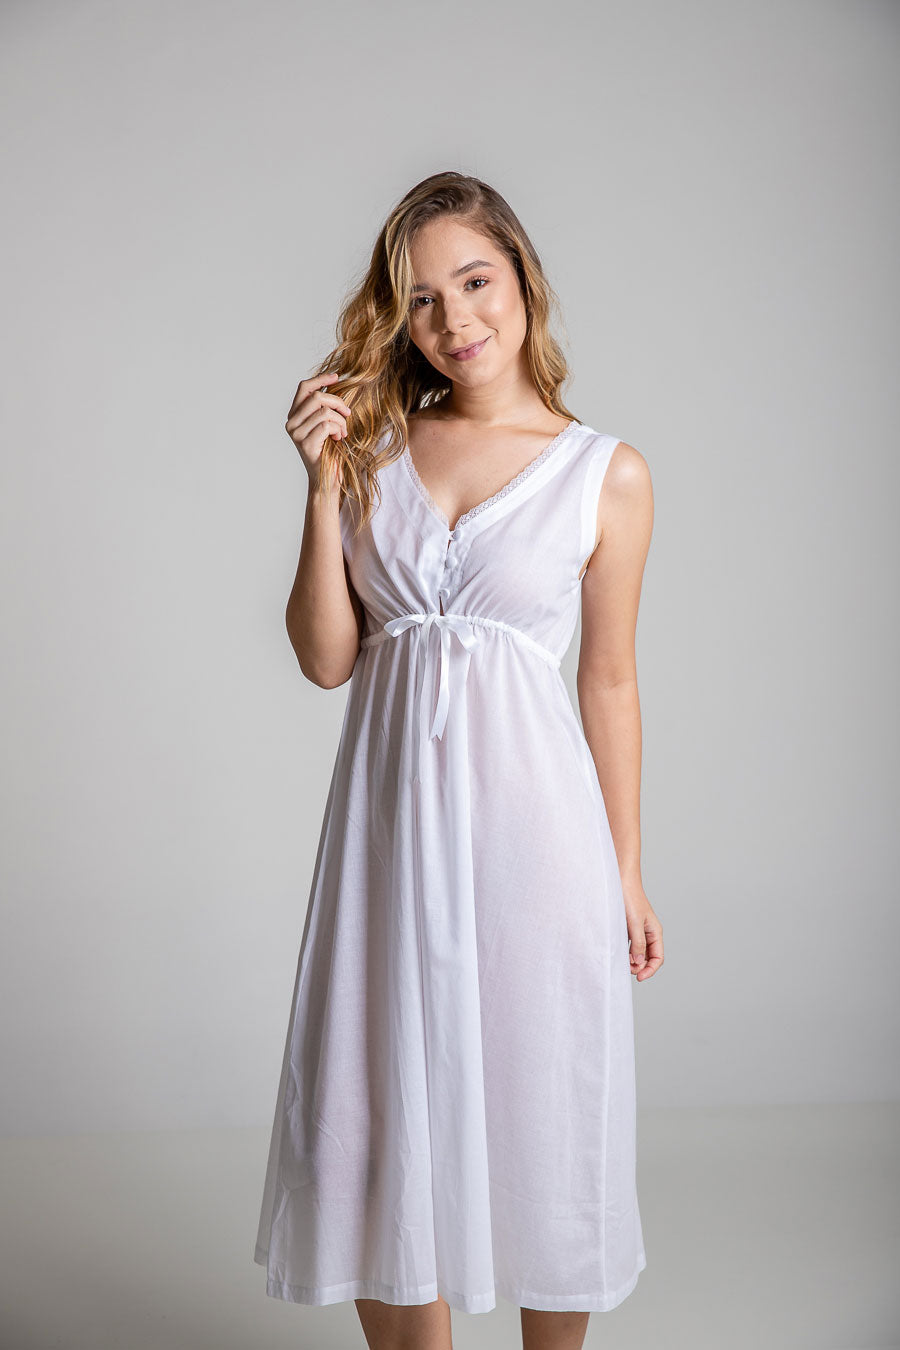 Romantic nightgown 100% cotton and lace